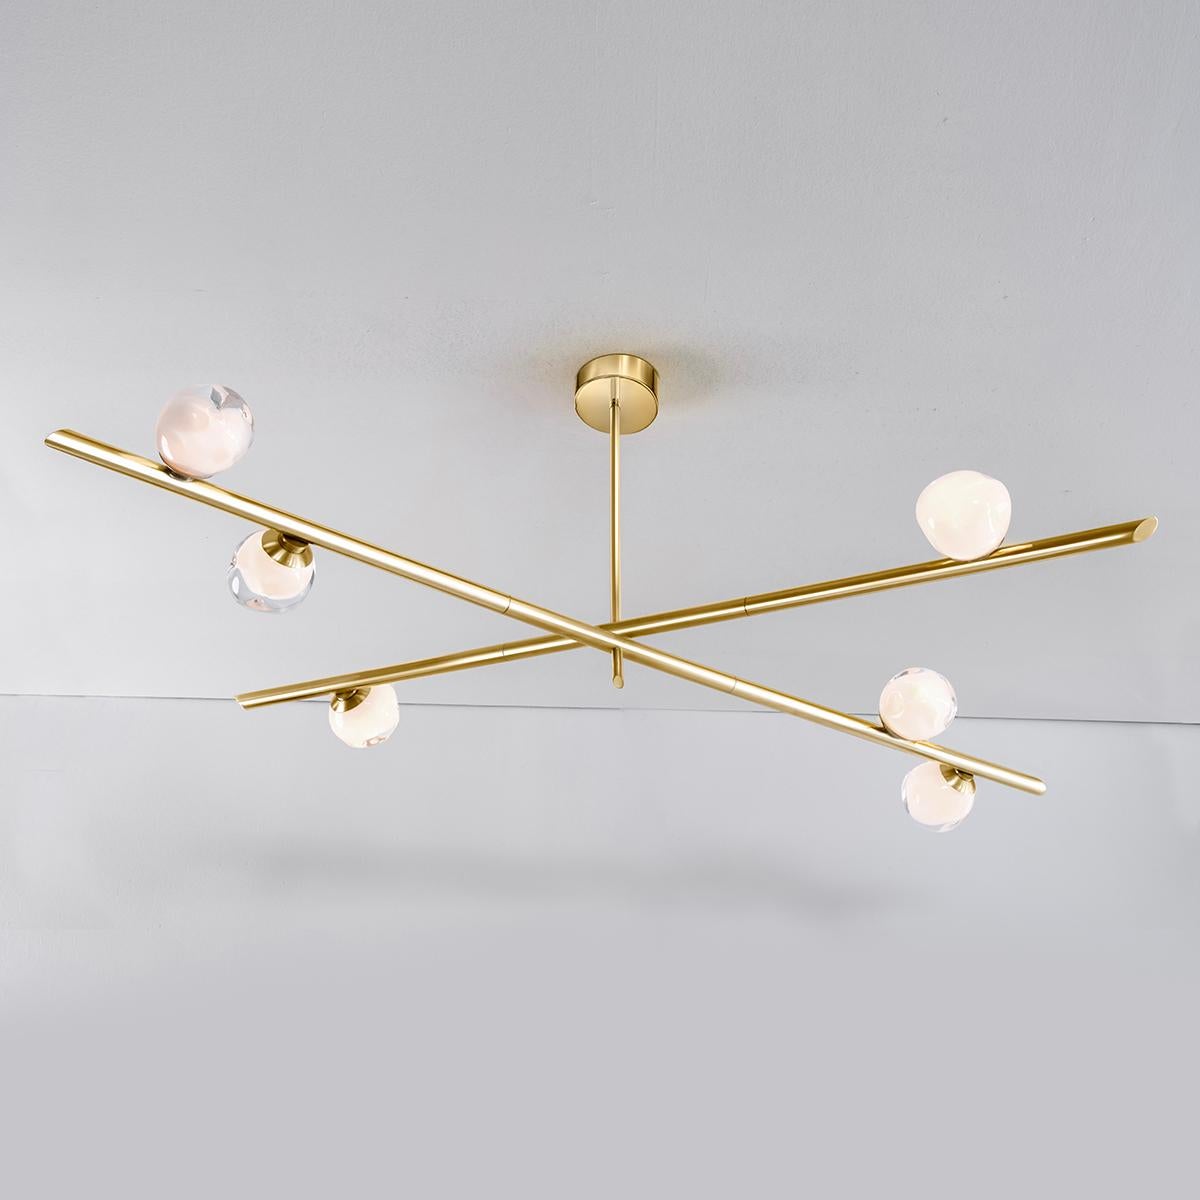 The Antares ceiling light harmoniously balances the linear details of its intersecting arms with the organic form of its handblown glass shades. The first image shows the fixture in polished brass-subsequent pictures are in the standard satin